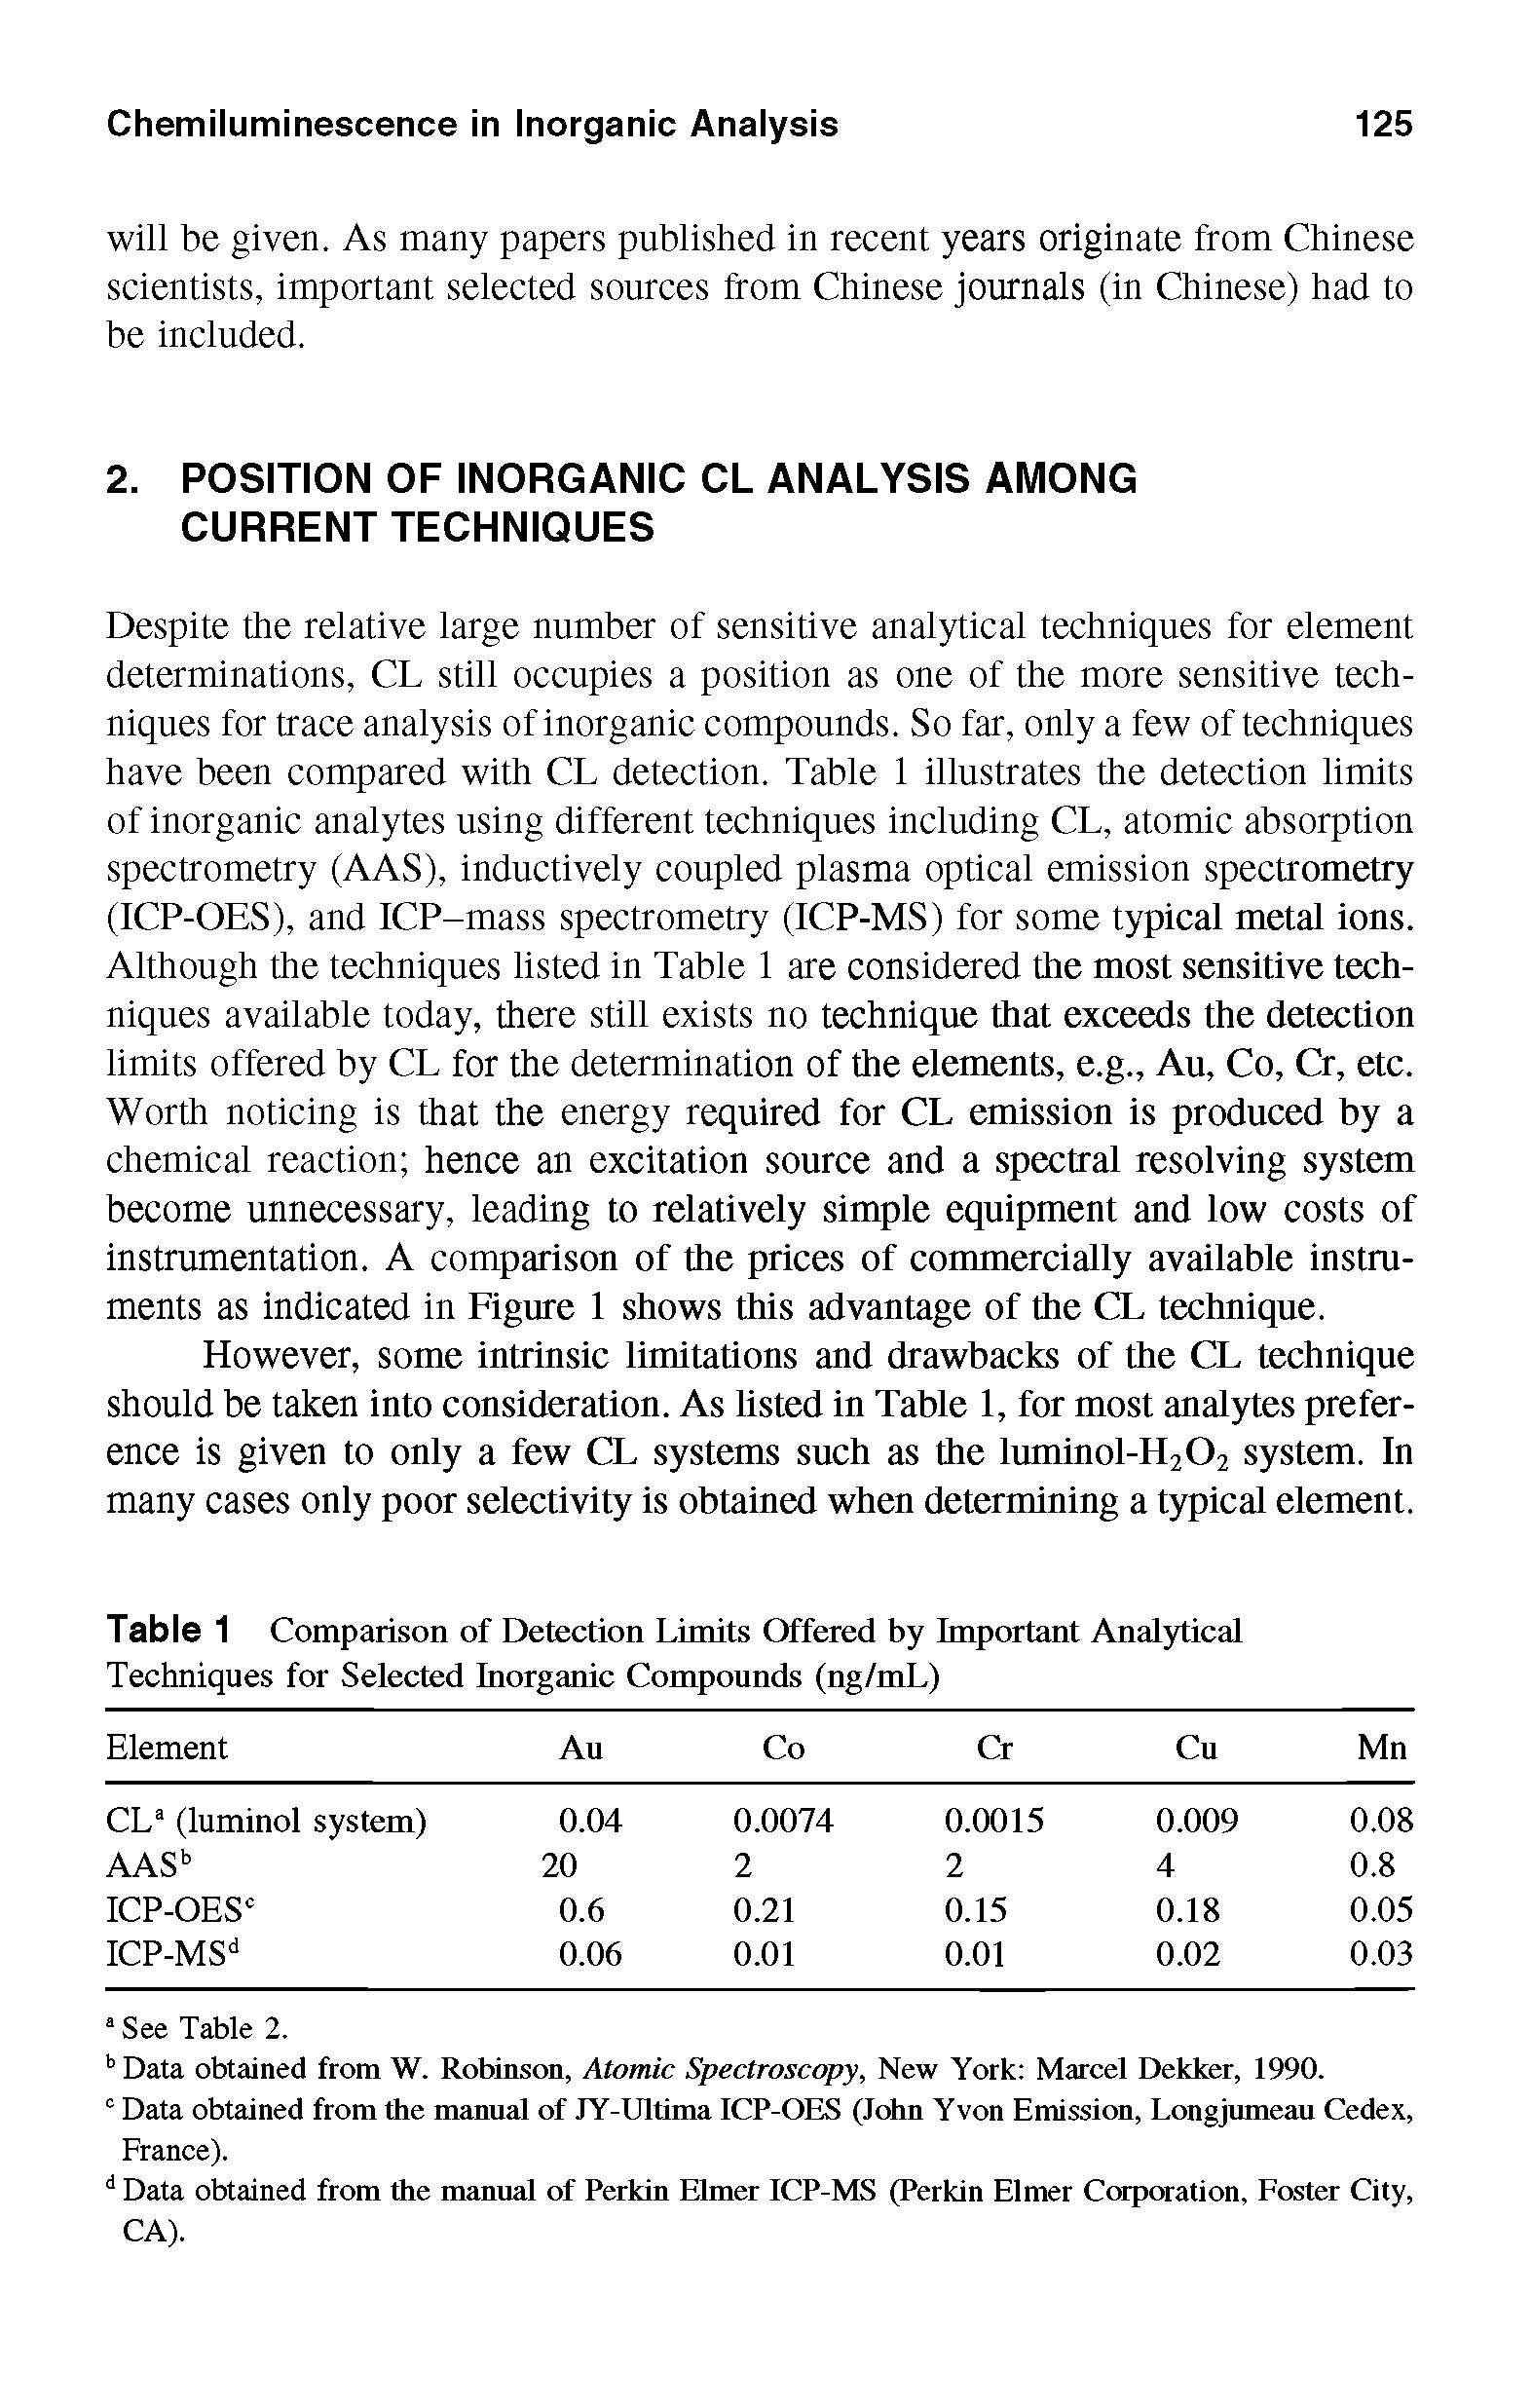 Table 1 Comparison of Detection Limits Offered by Important Analytical Techniques for Selected Inorganic Compounds (ng/mL)...